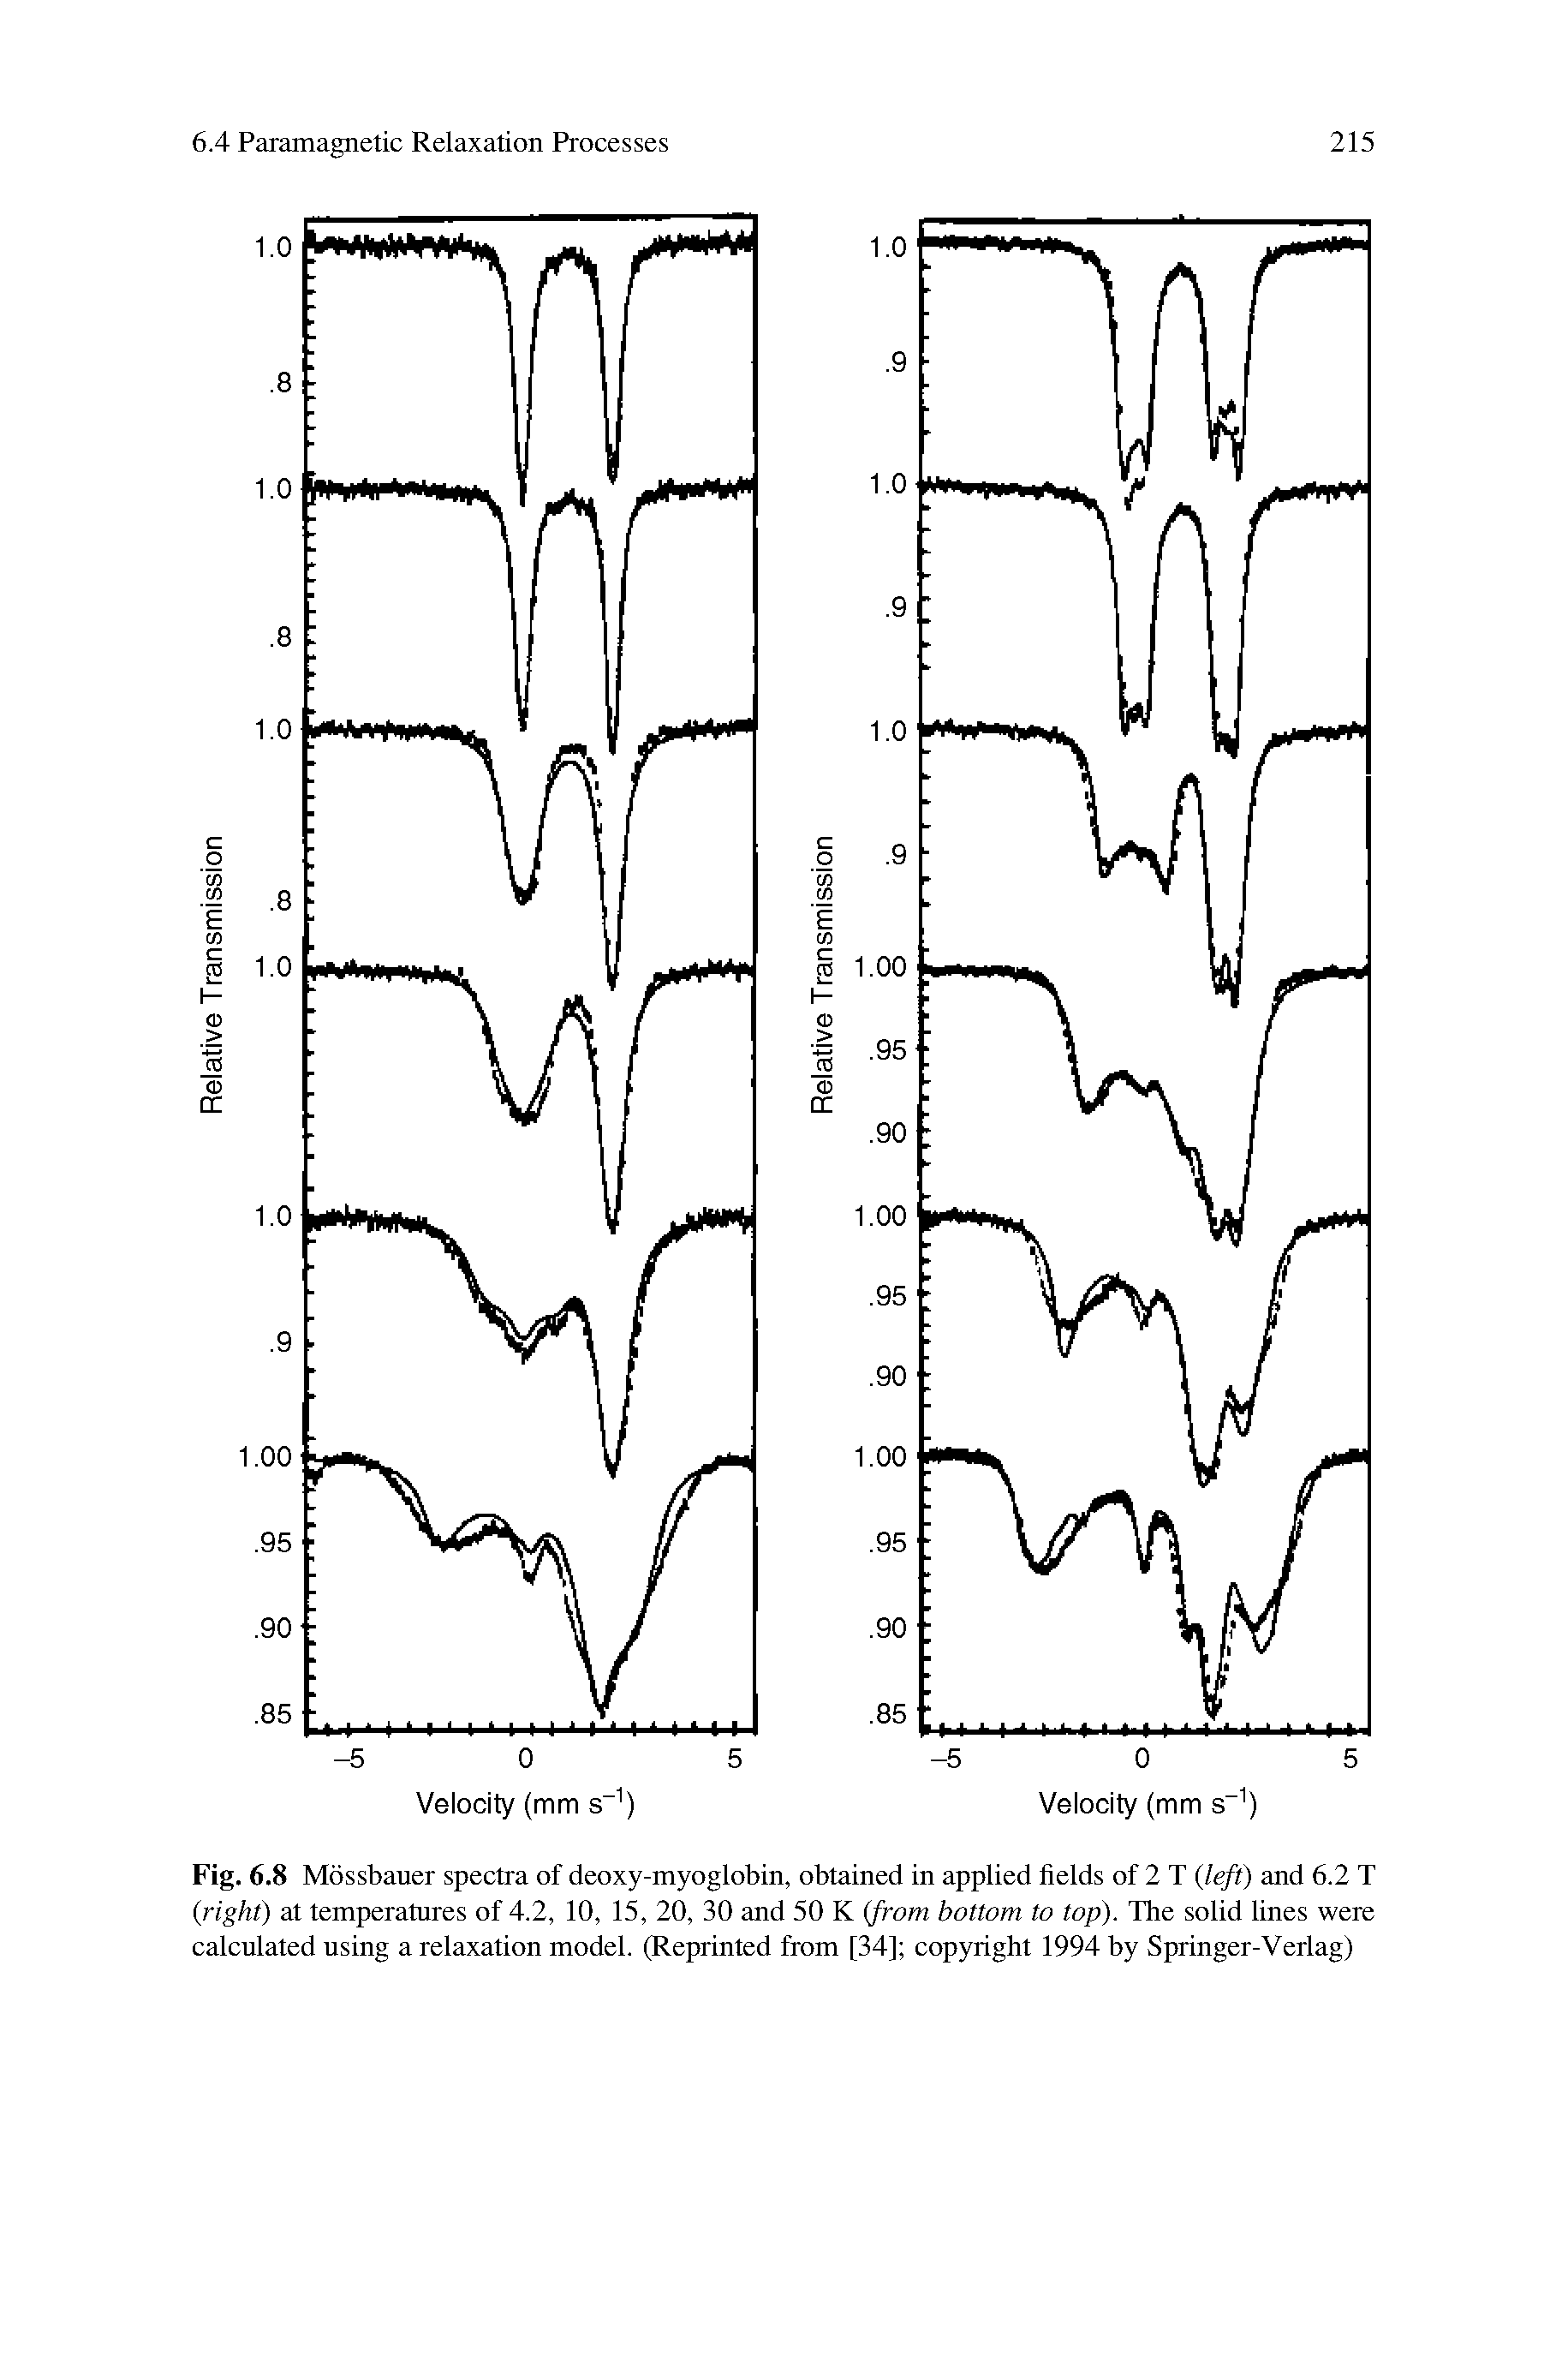 Fig. 6.8 Mossbauer spectra of deoxy-myoglobin, obtained in applied fields of 2 T (left) and 6.2 T (right) at temperatures of 4.2, 10, 15, 20, 30 and 50 K (from bottom to top). The solid lines were calculated using a relaxation model. (Reprinted from [34] copyright 1994 by Springer-Verlag)...